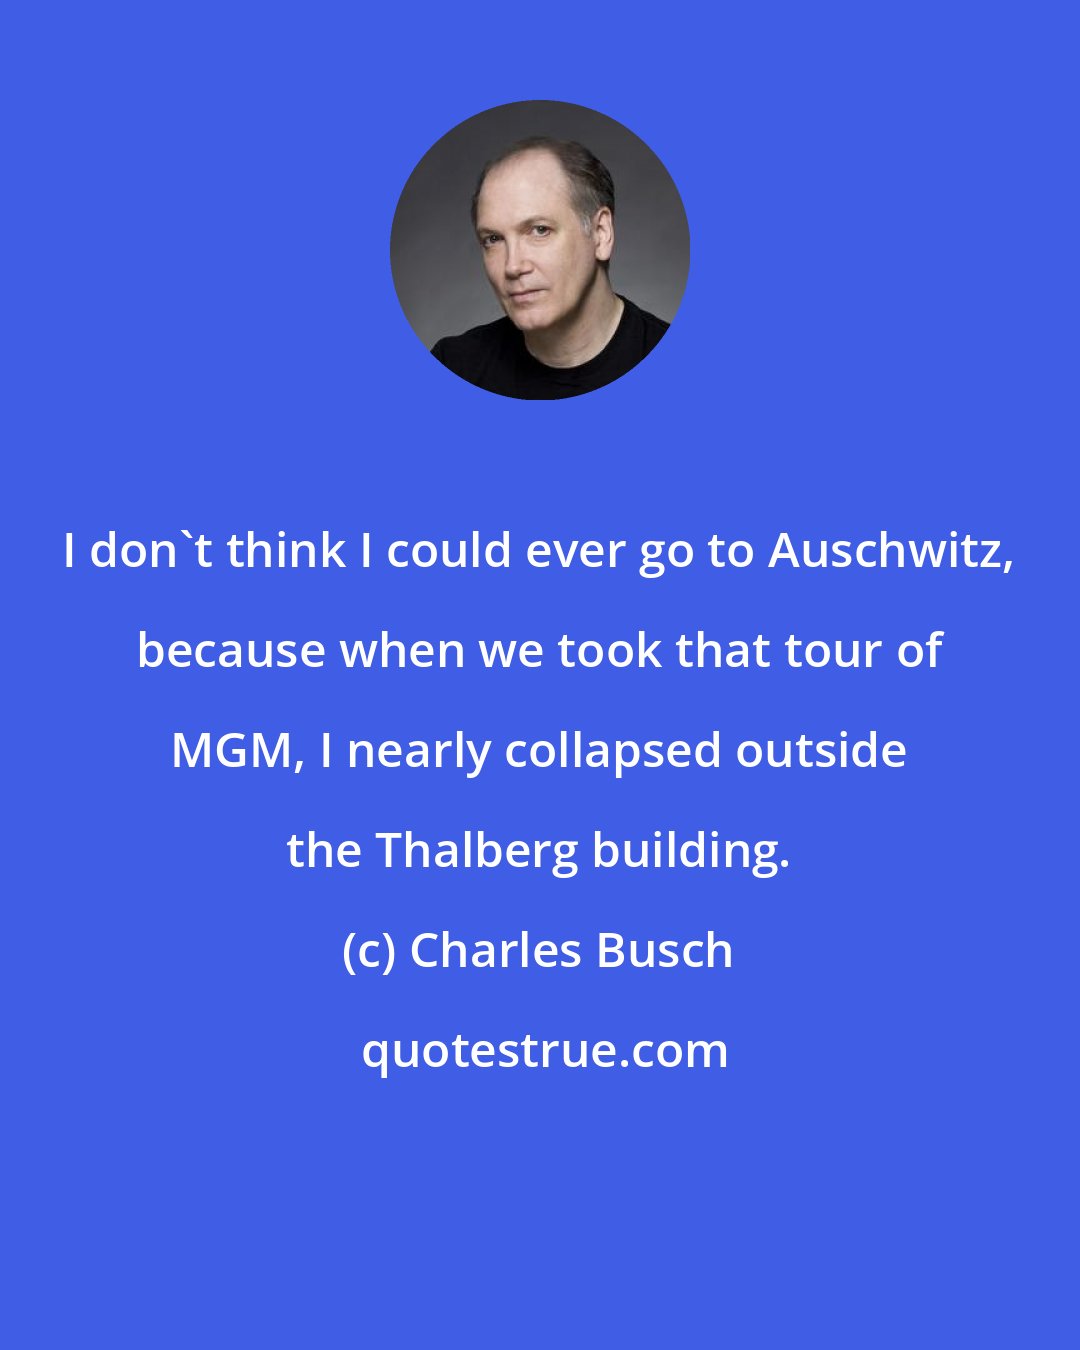 Charles Busch: I don't think I could ever go to Auschwitz, because when we took that tour of MGM, I nearly collapsed outside the Thalberg building.